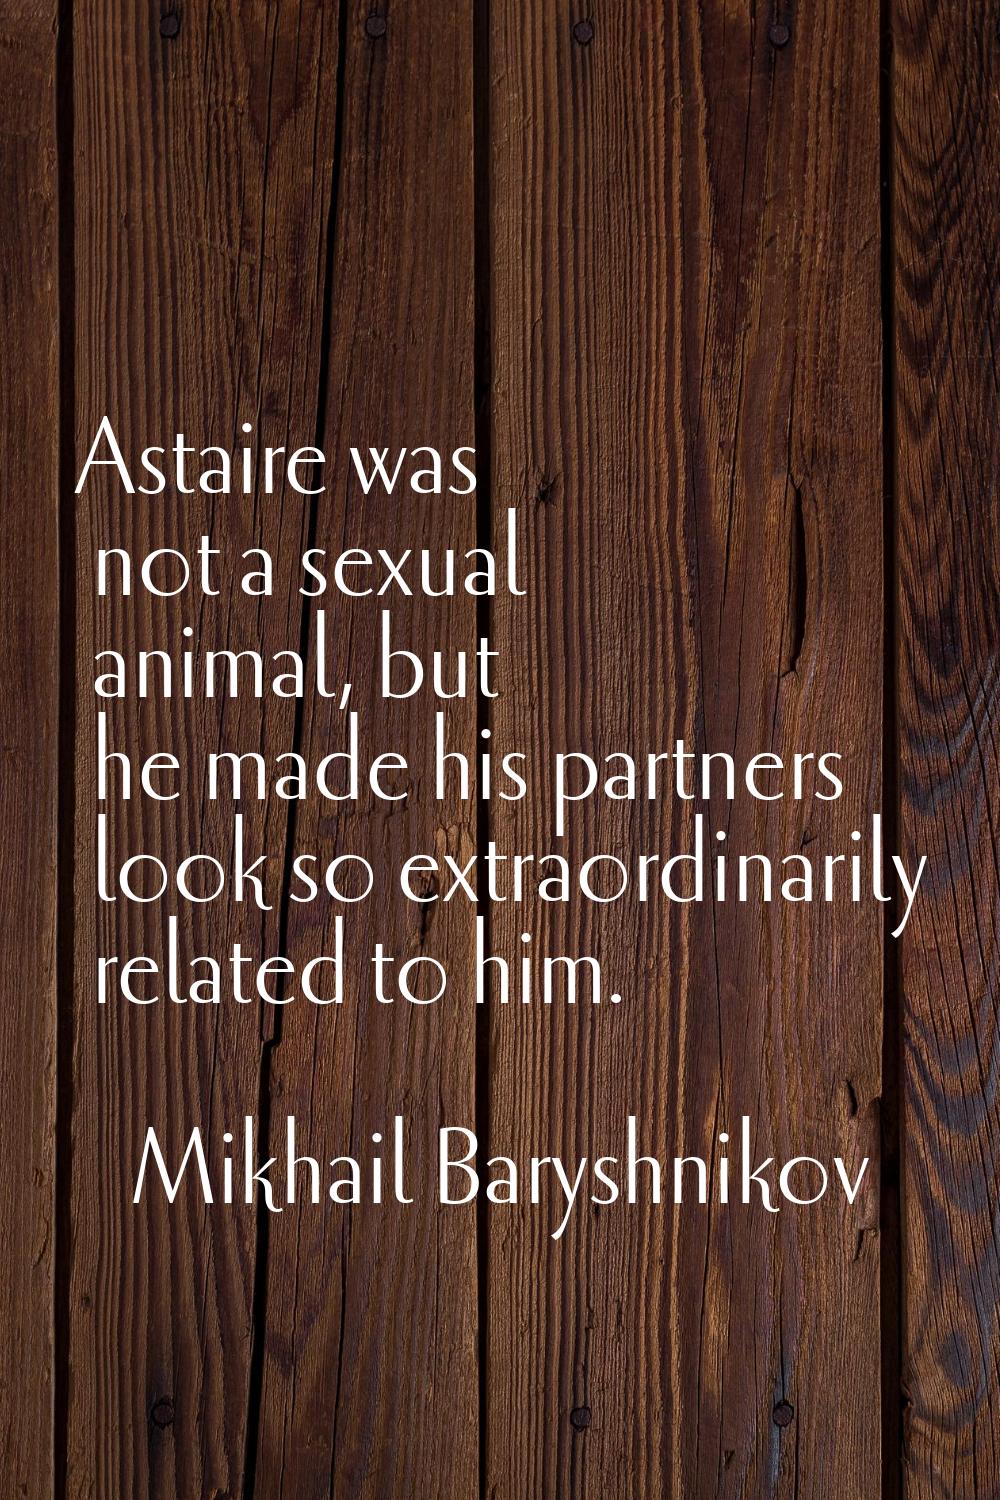 Astaire was not a sexual animal, but he made his partners look so extraordinarily related to him.